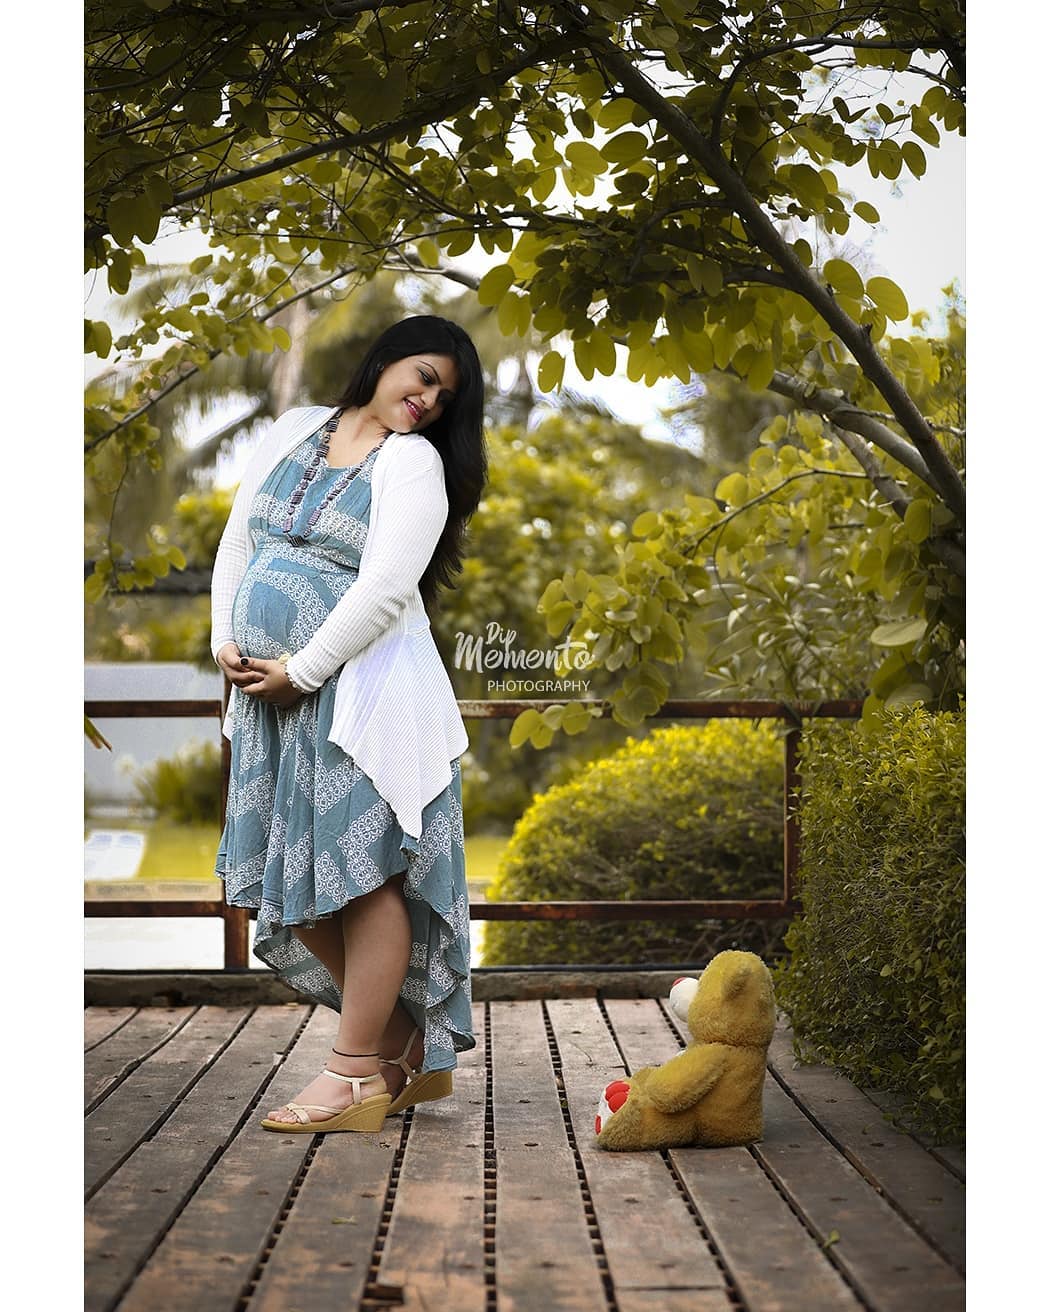 Preparing to fall in love for life time... 👶😘
.
Shoot by: @dip_memento_photography
.
 your inquiry @ 9924227745. :)
#maternityphotoshoot #maternityphotoshootideas #maternityphotoideas #maternitysession #maternityphotography #maternityphotographer #pregnancyphotoshoot #pregnancyglow #bestmaternityphotographer #babybumpphotography #babybumpphotoshoot #babybump #bestpregnancyphotos#bestpregnancyphotographer #pregnancy #ahmedabadphotographer #bestphotographerofahmedabad #photostudio #bestphotographerinindia #9924227745 #ahmedabad #dipmementophotography #theconceptstudiobyamitbarot #prebabyphotoshoot